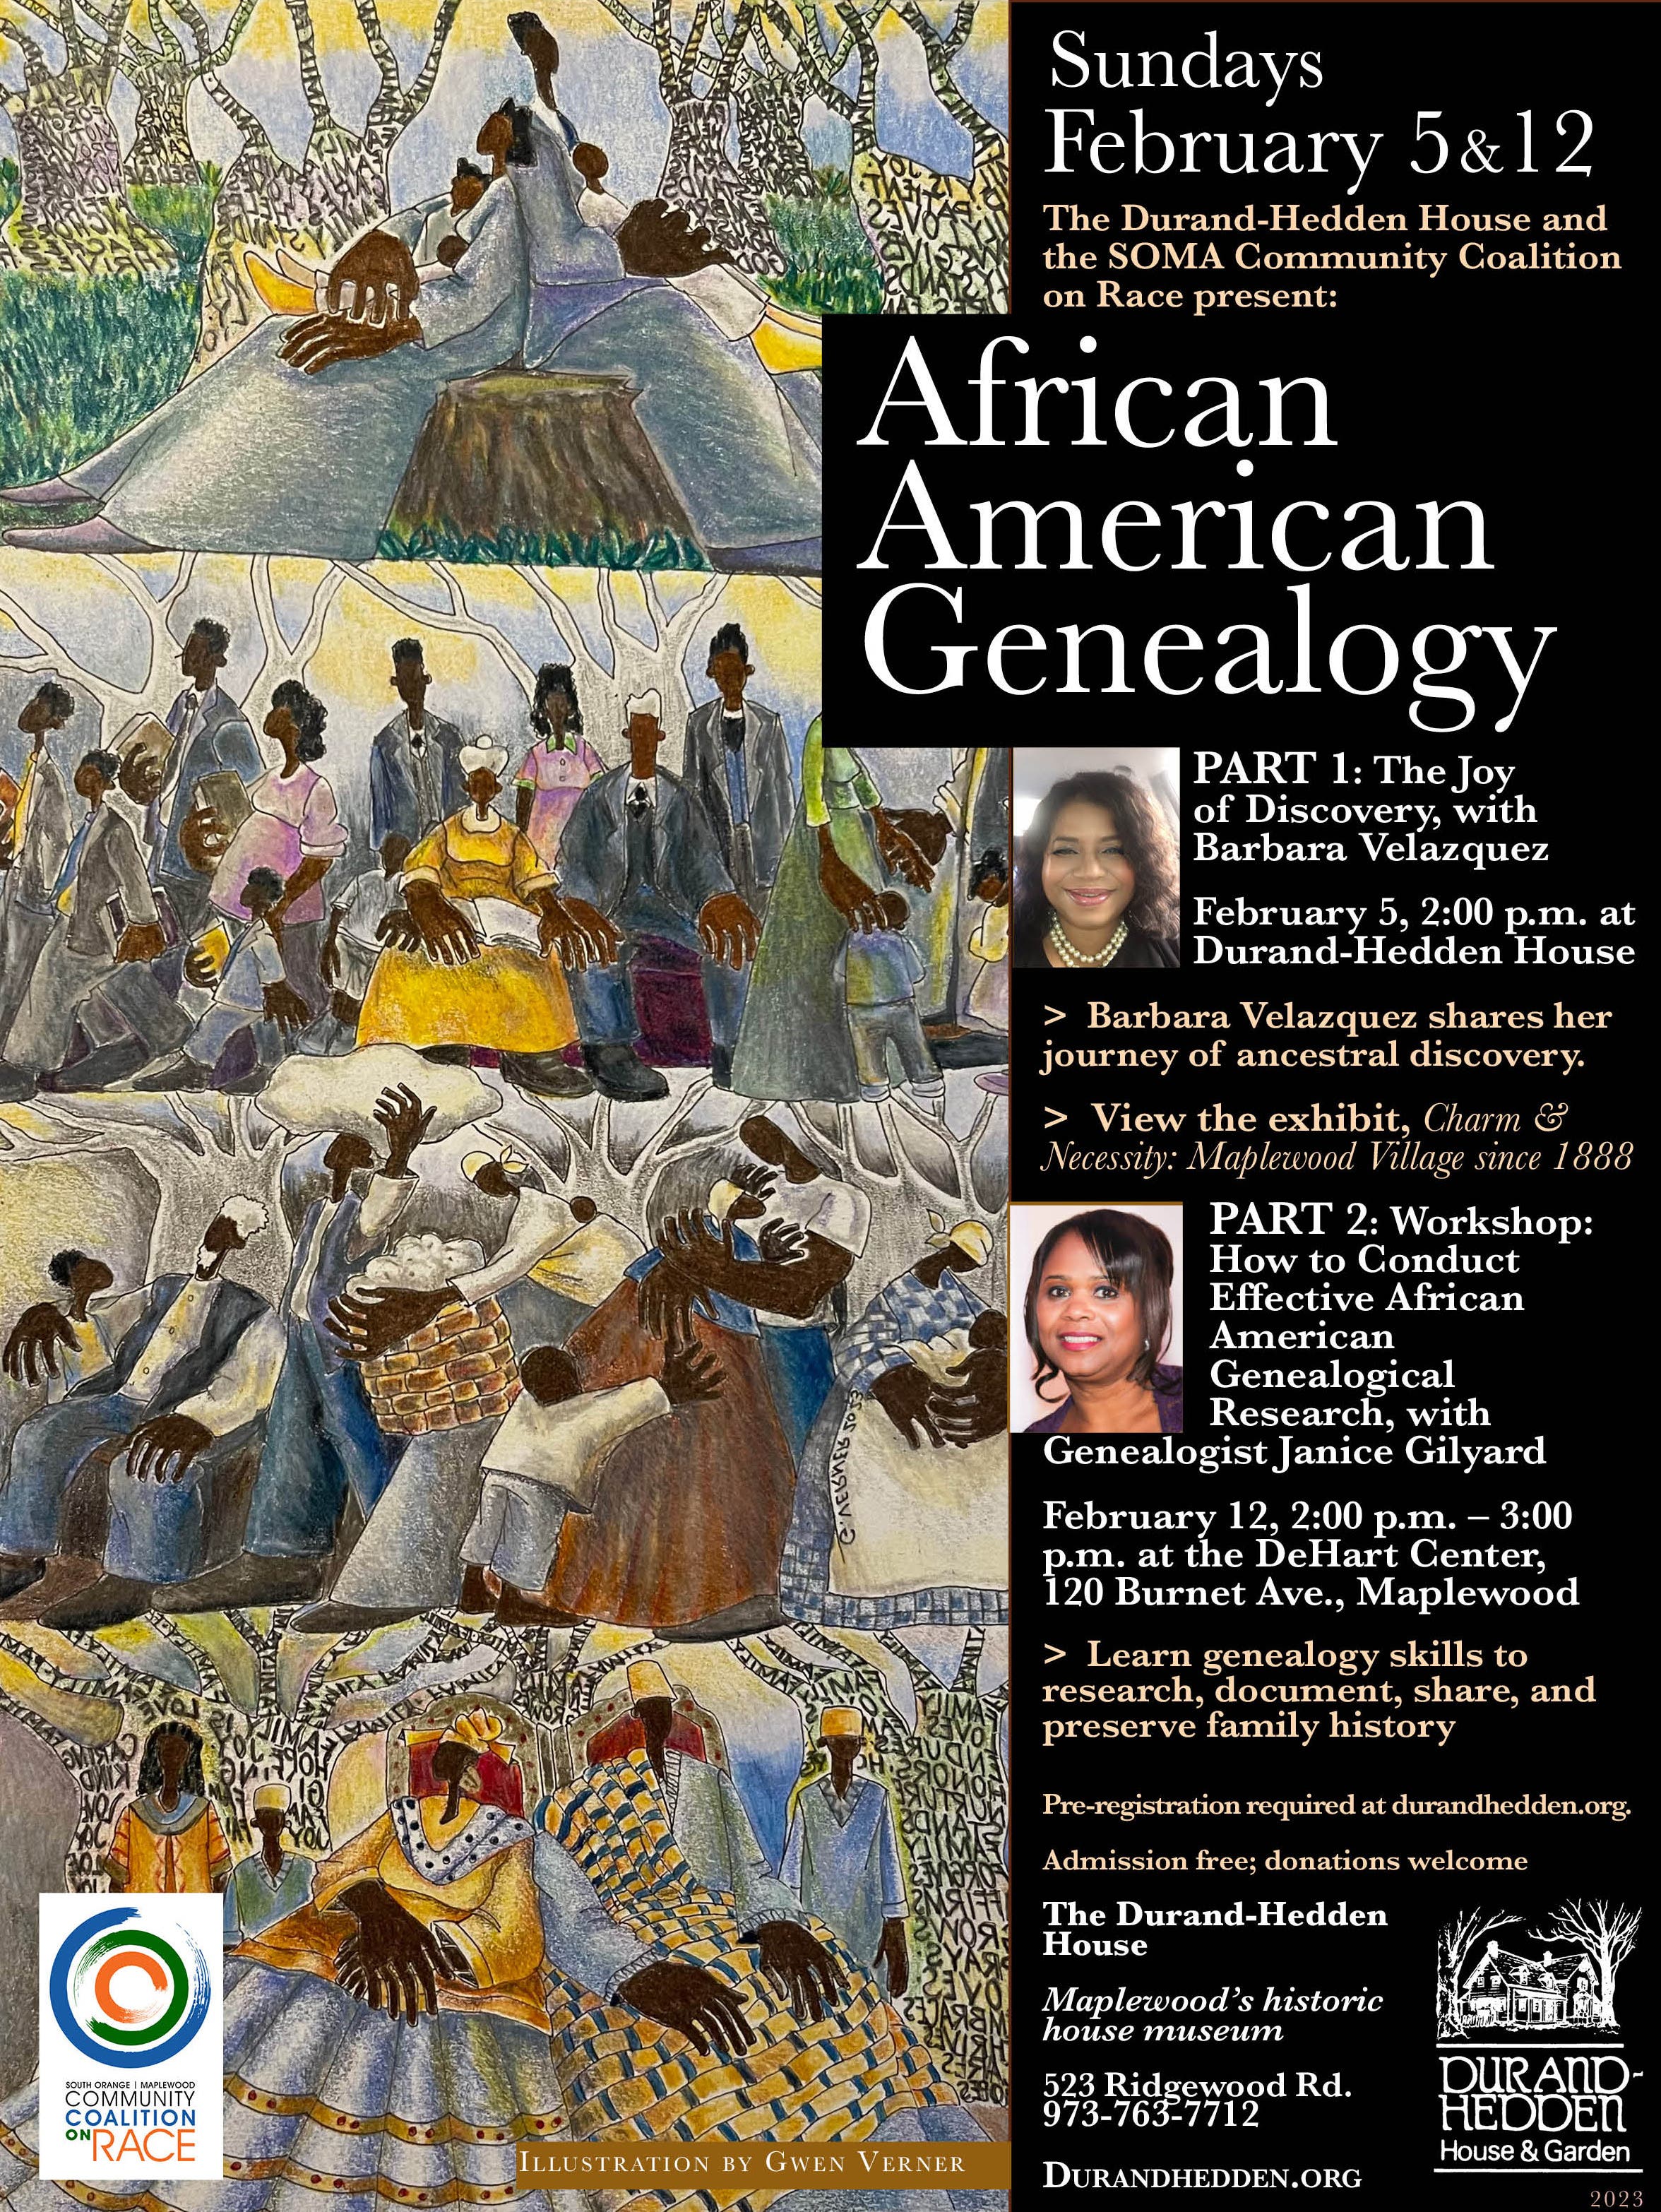 Workshop: In Search of Our Ancestors, How to Conduct Effective African American Genealogical Researc